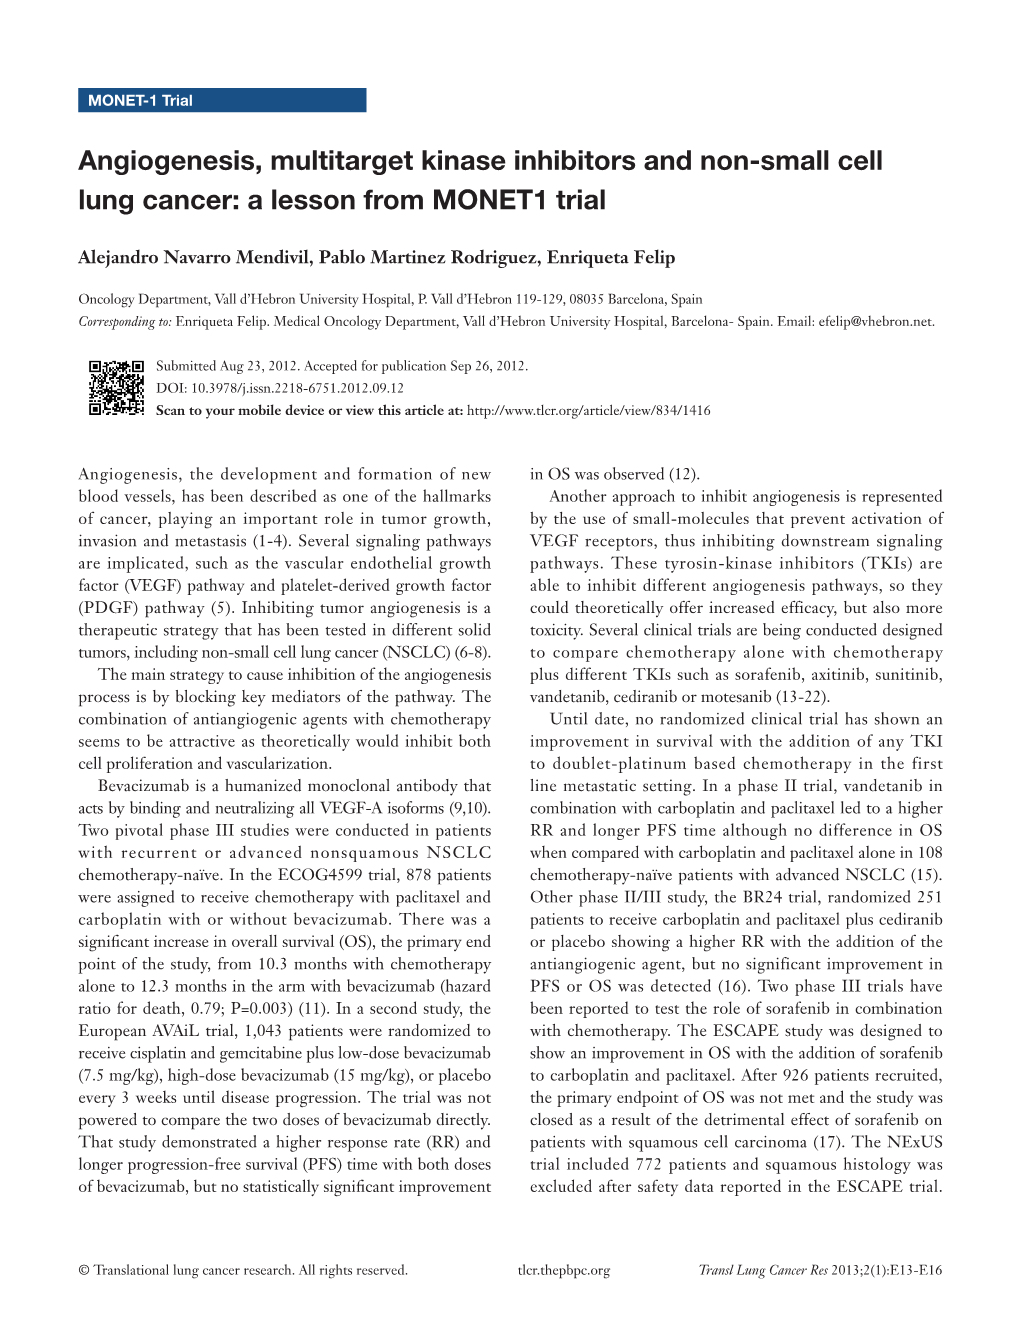 Angiogenesis, Multitarget Kinase Inhibitors and Non-Small Cell Lung Cancer: a Lesson from MONET1 Trial